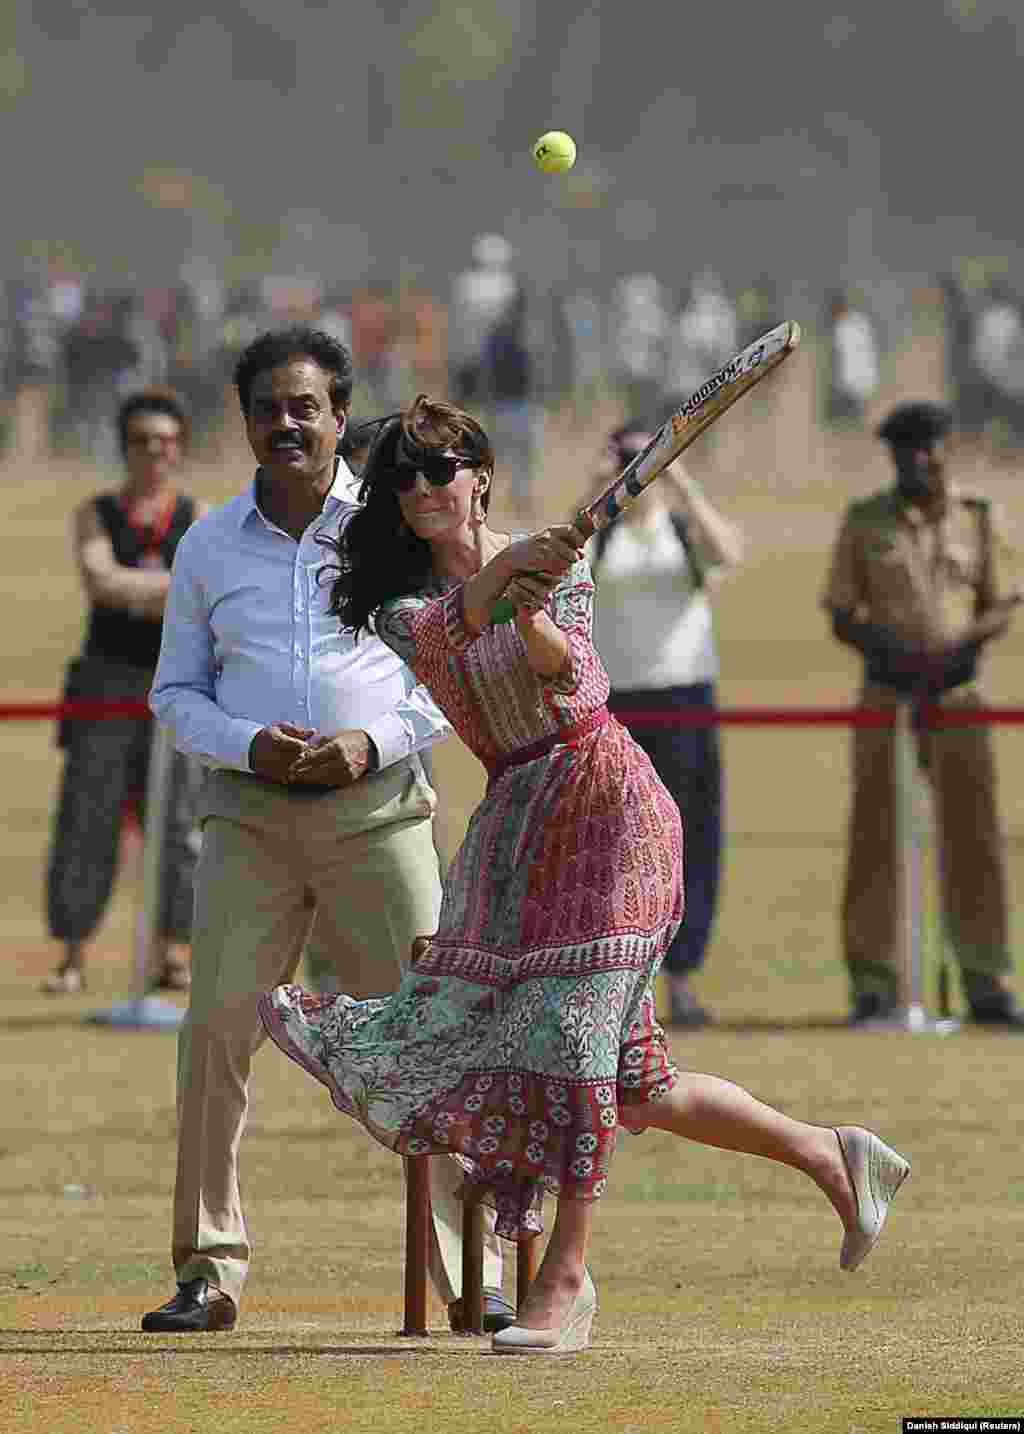 England&#39;s Catherine, Duchess of Cambridge, plays cricket with children in Mumbai, India, on April 10, 2016.